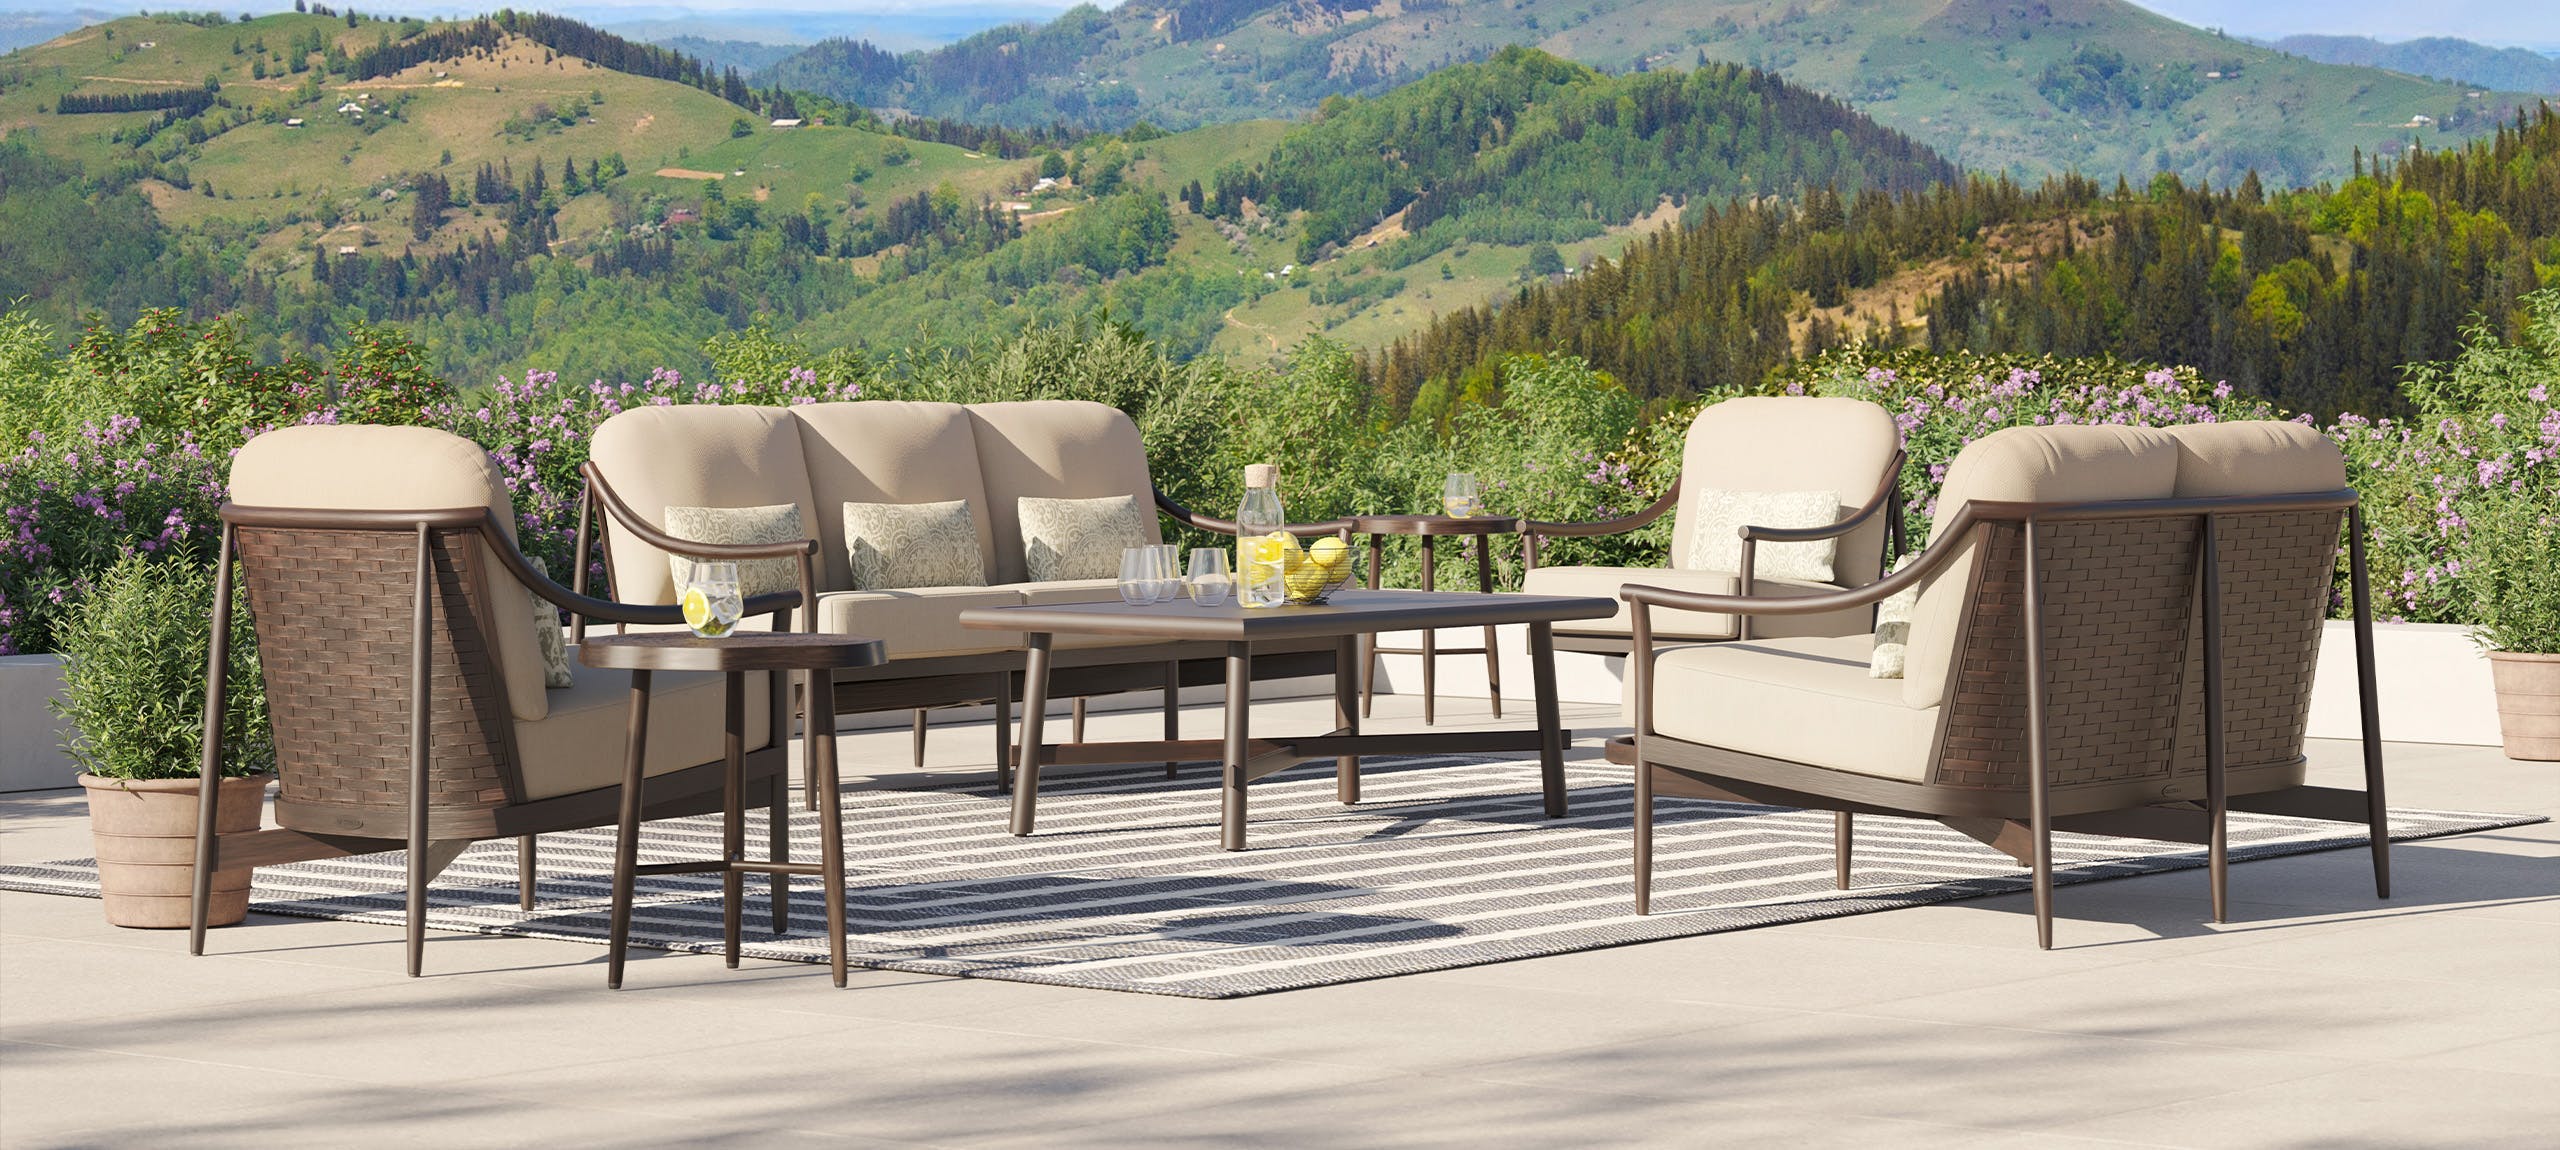 Largo Deep Seating Set By Castelle